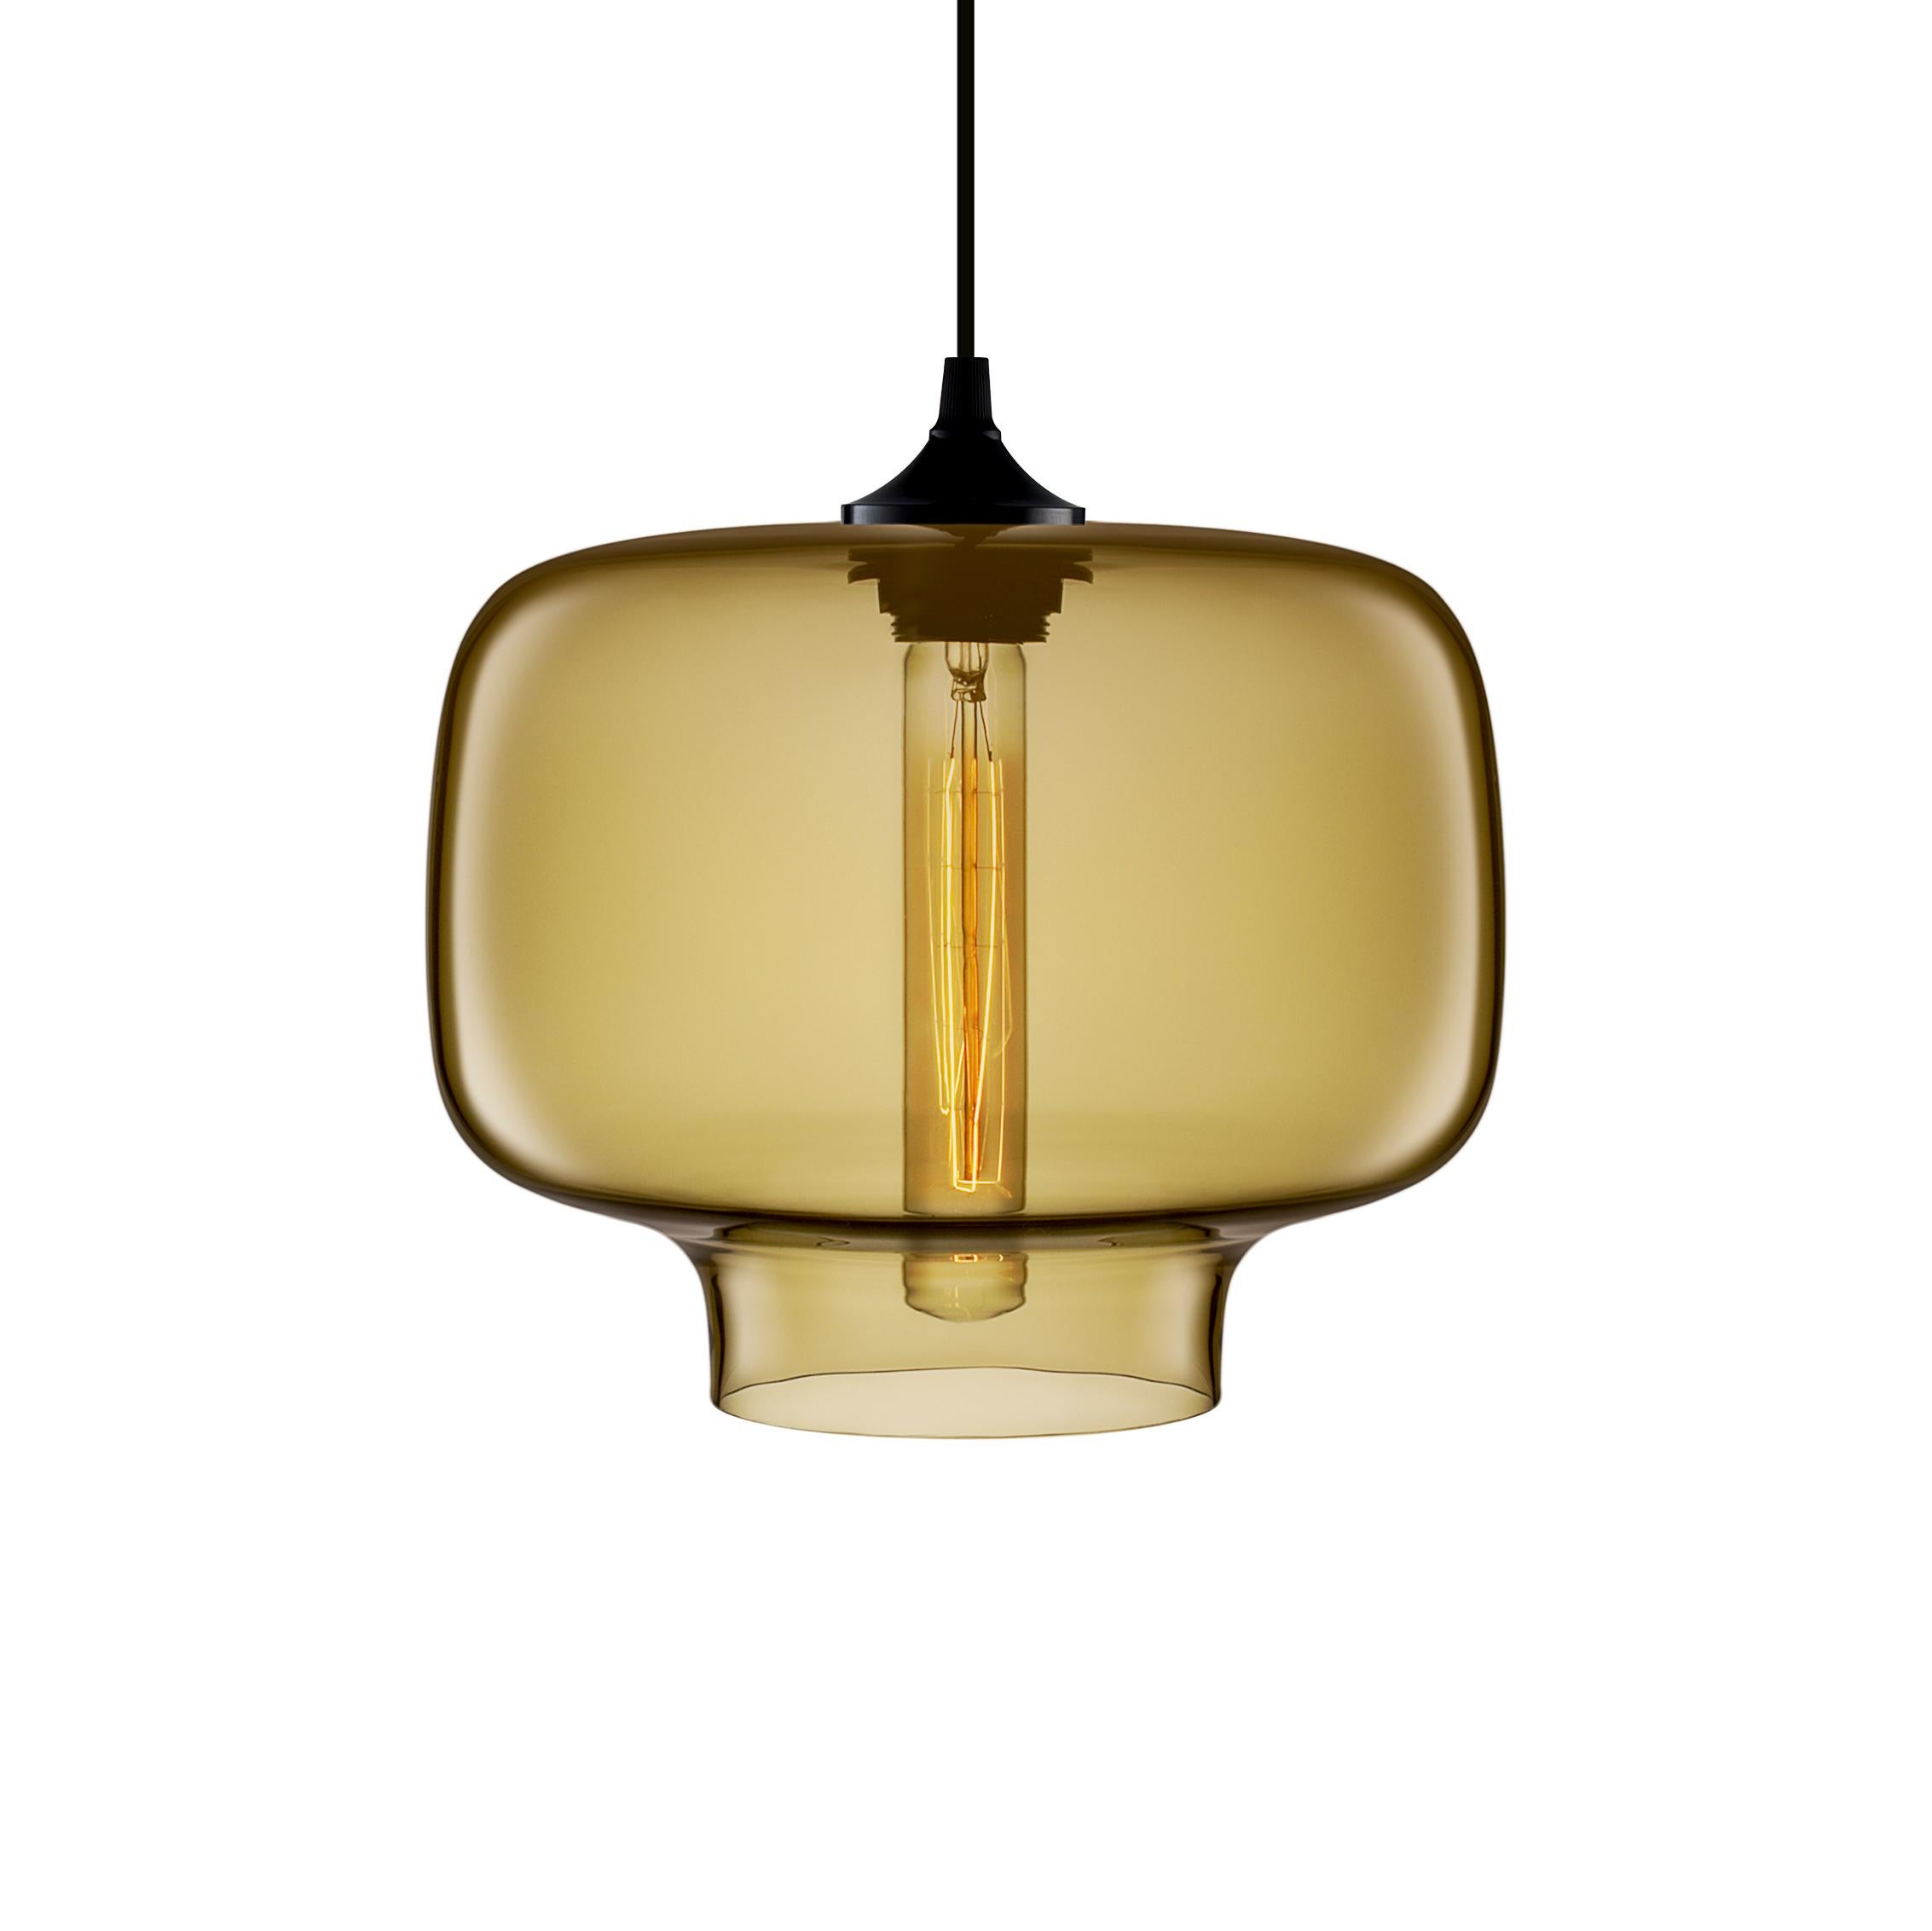 Oculo Amber Handblown Modern Glass Pendant Light, Made in the USA In New Condition For Sale In Beacon, NY